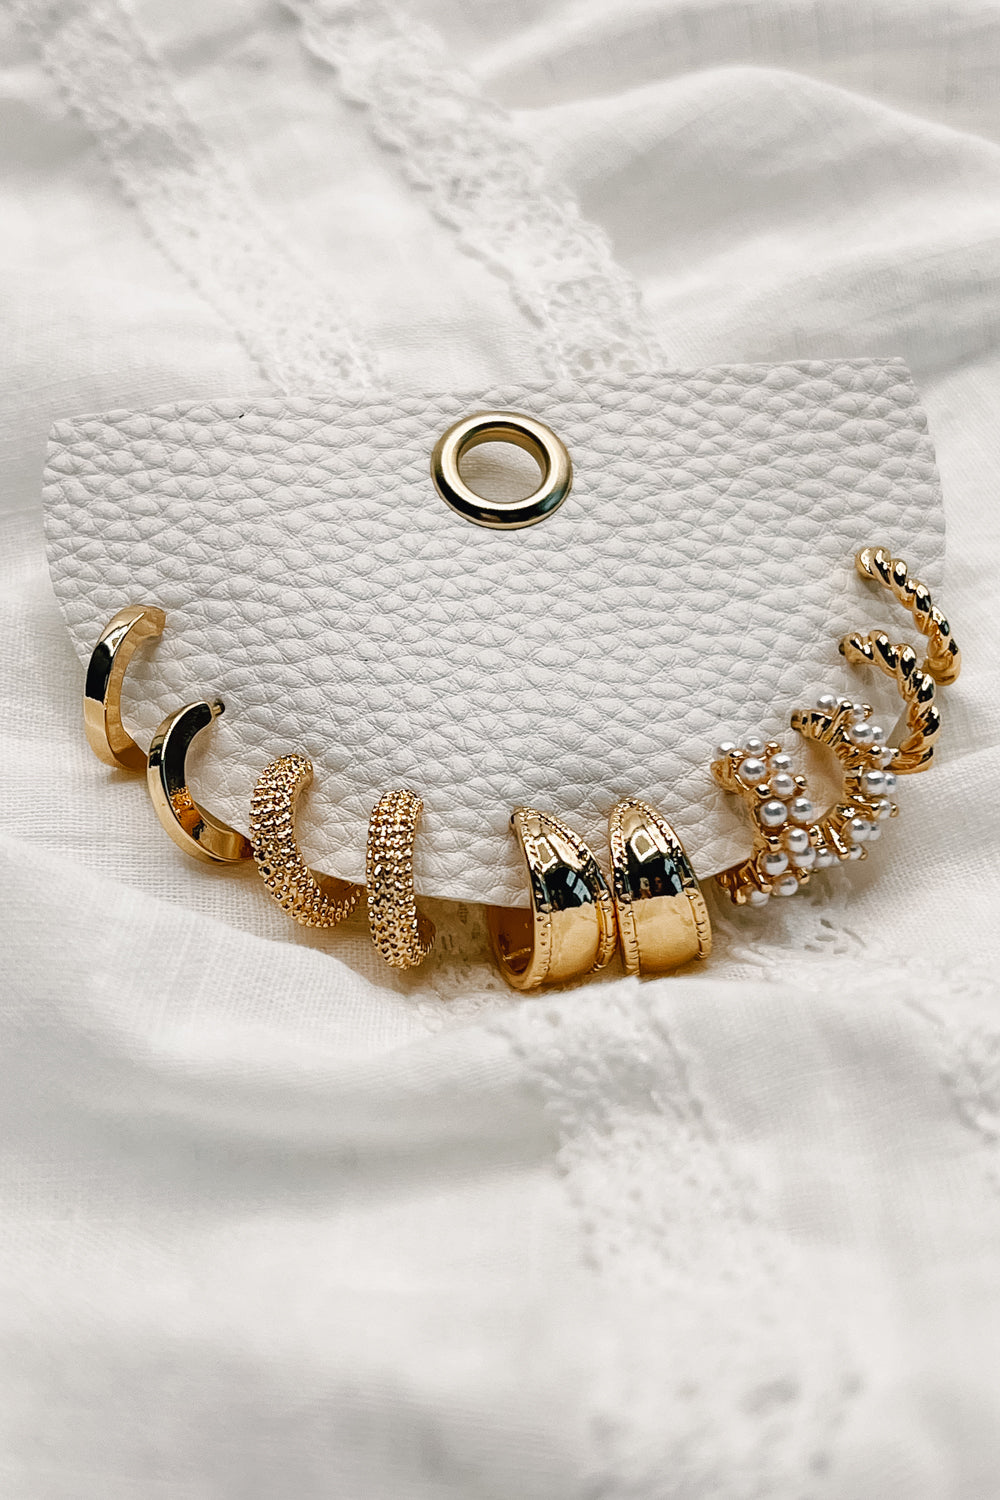 A close-up view of the Annie Earring Set in gold.  The set features 5 pairs of earrings varying in style. More details in the product description.